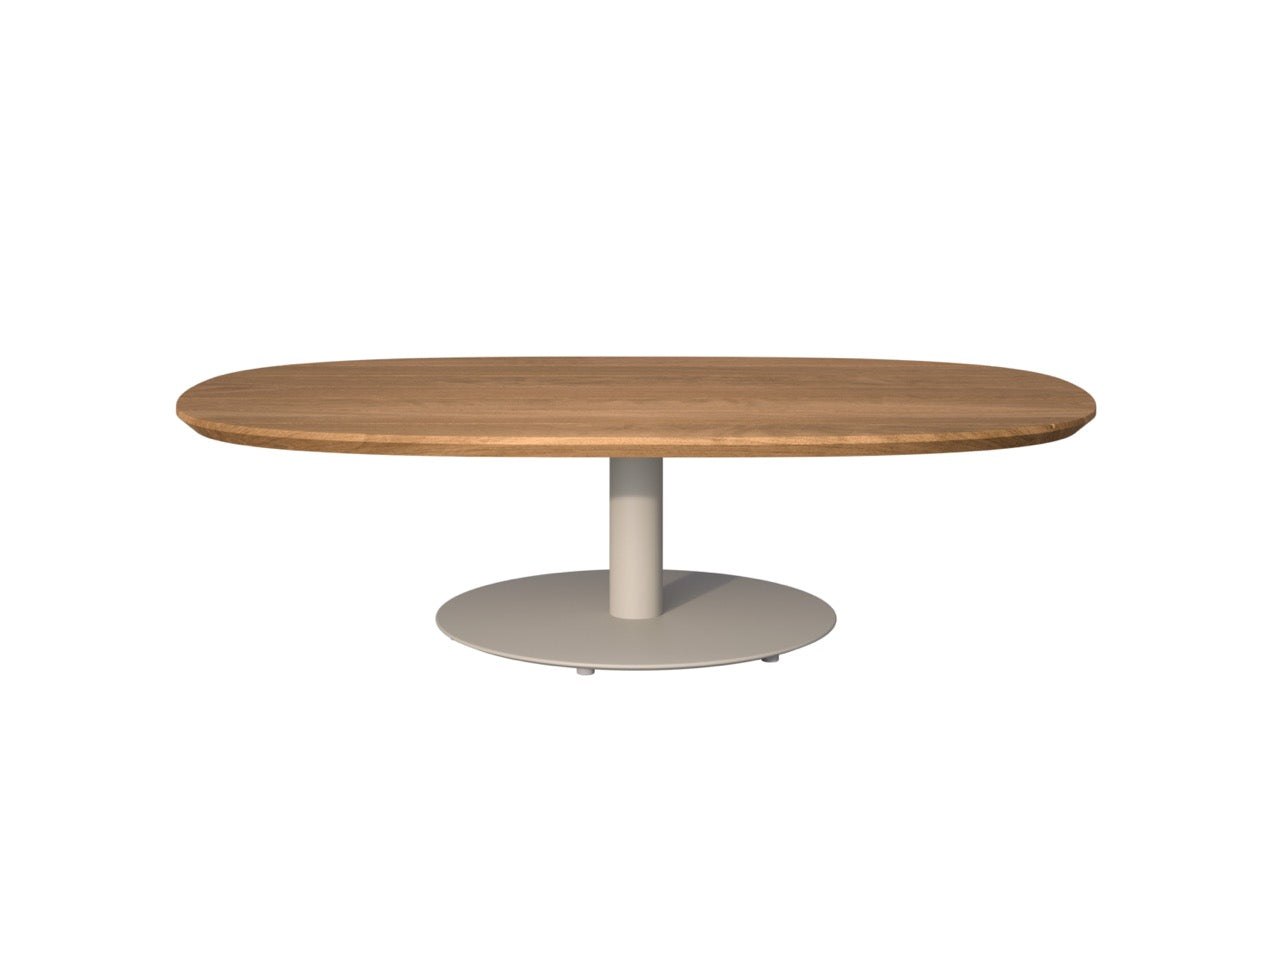 Tribù T-TABLE oval coffee table 136 cm